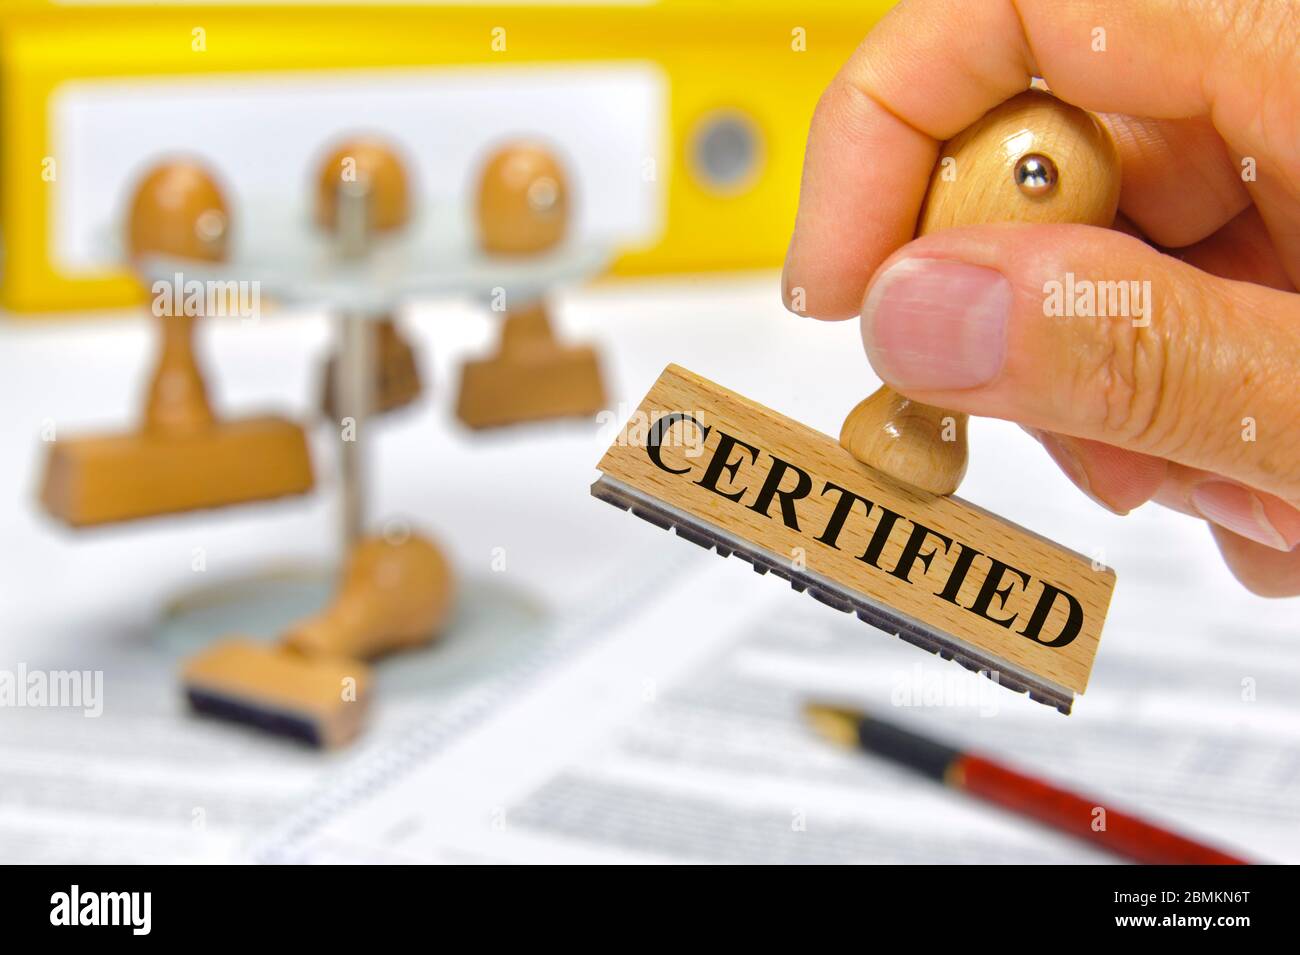 certified  printed on rubber stamp Stock Photo